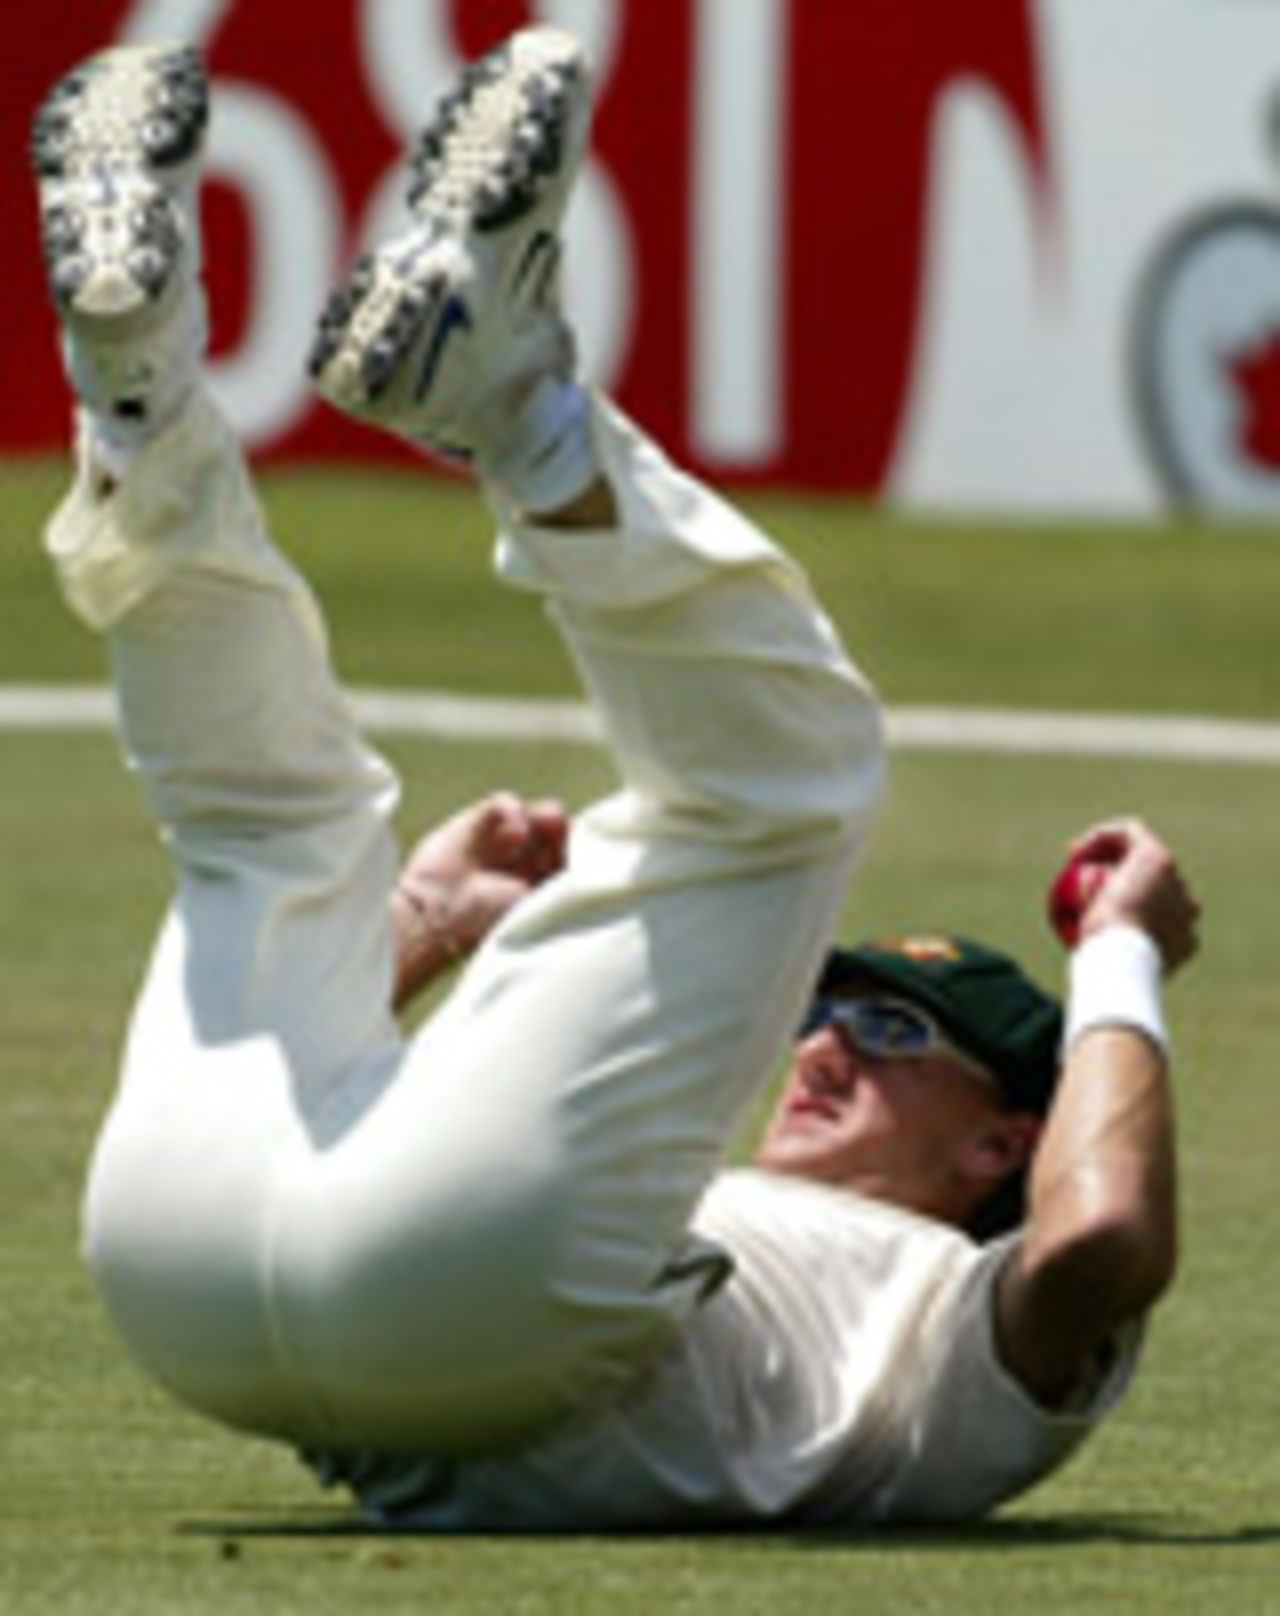 Andy Bichel takes a catch to dismiss Rahul Dravid, Australia v India, 2nd Test, Adelaide, December 15, 2003